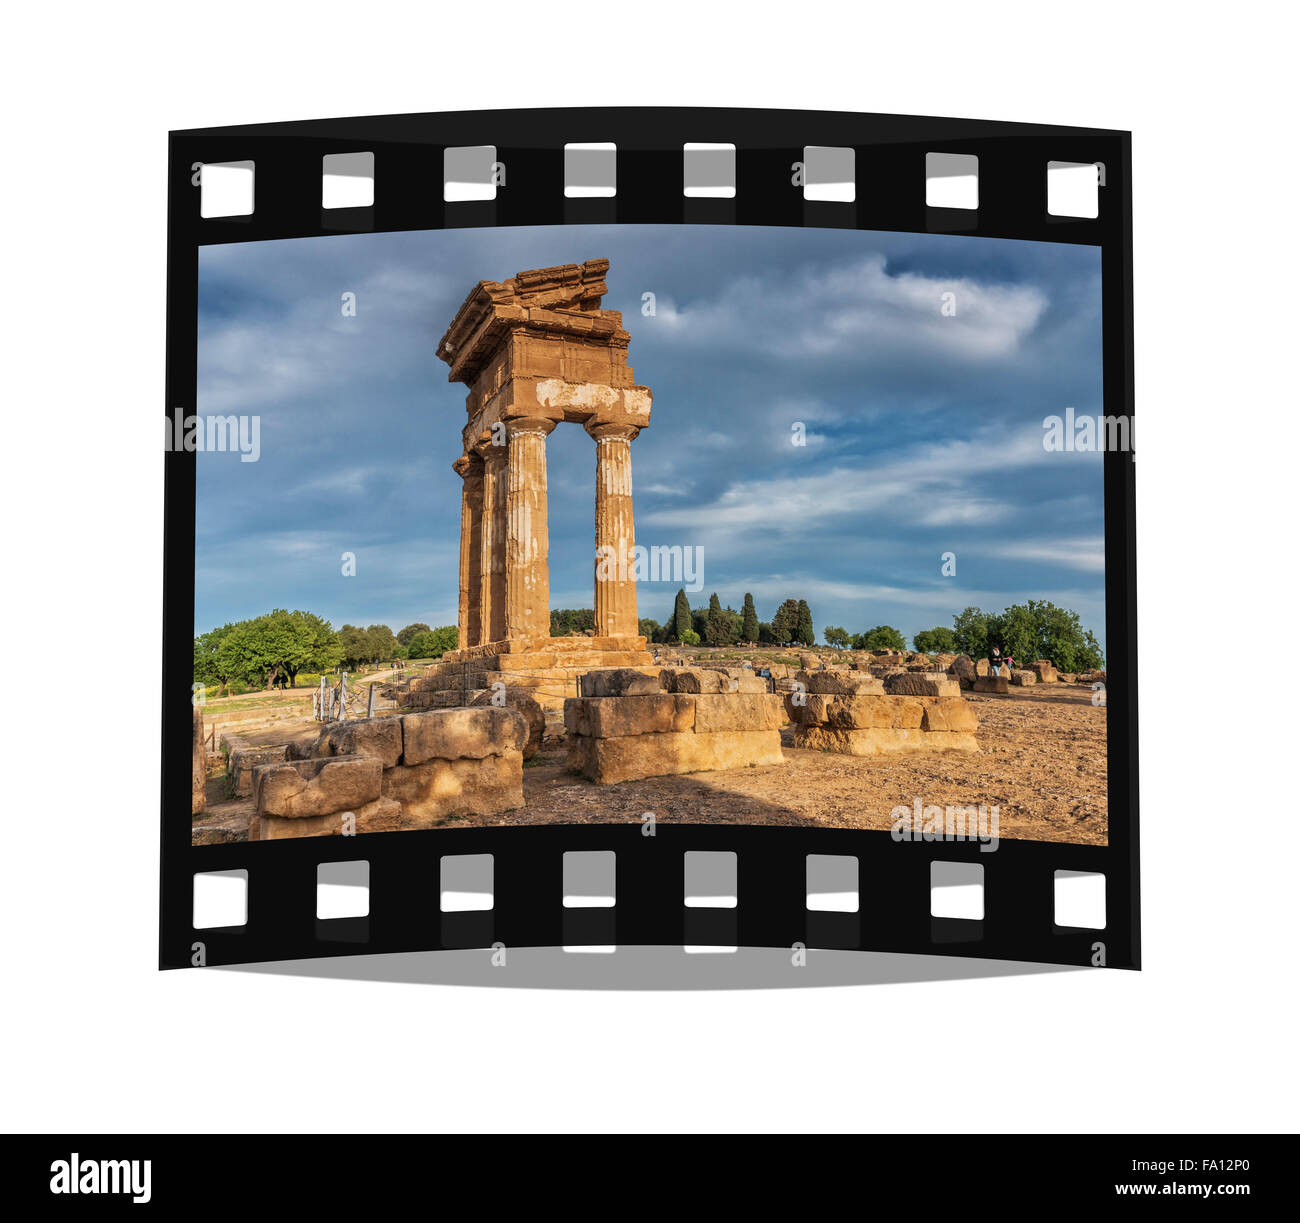 The Temple of Castor and Pollux belongs to the archaeological sites of Agrigento, Valley of the Temples, Sicily, Italy, Europe Stock Photo